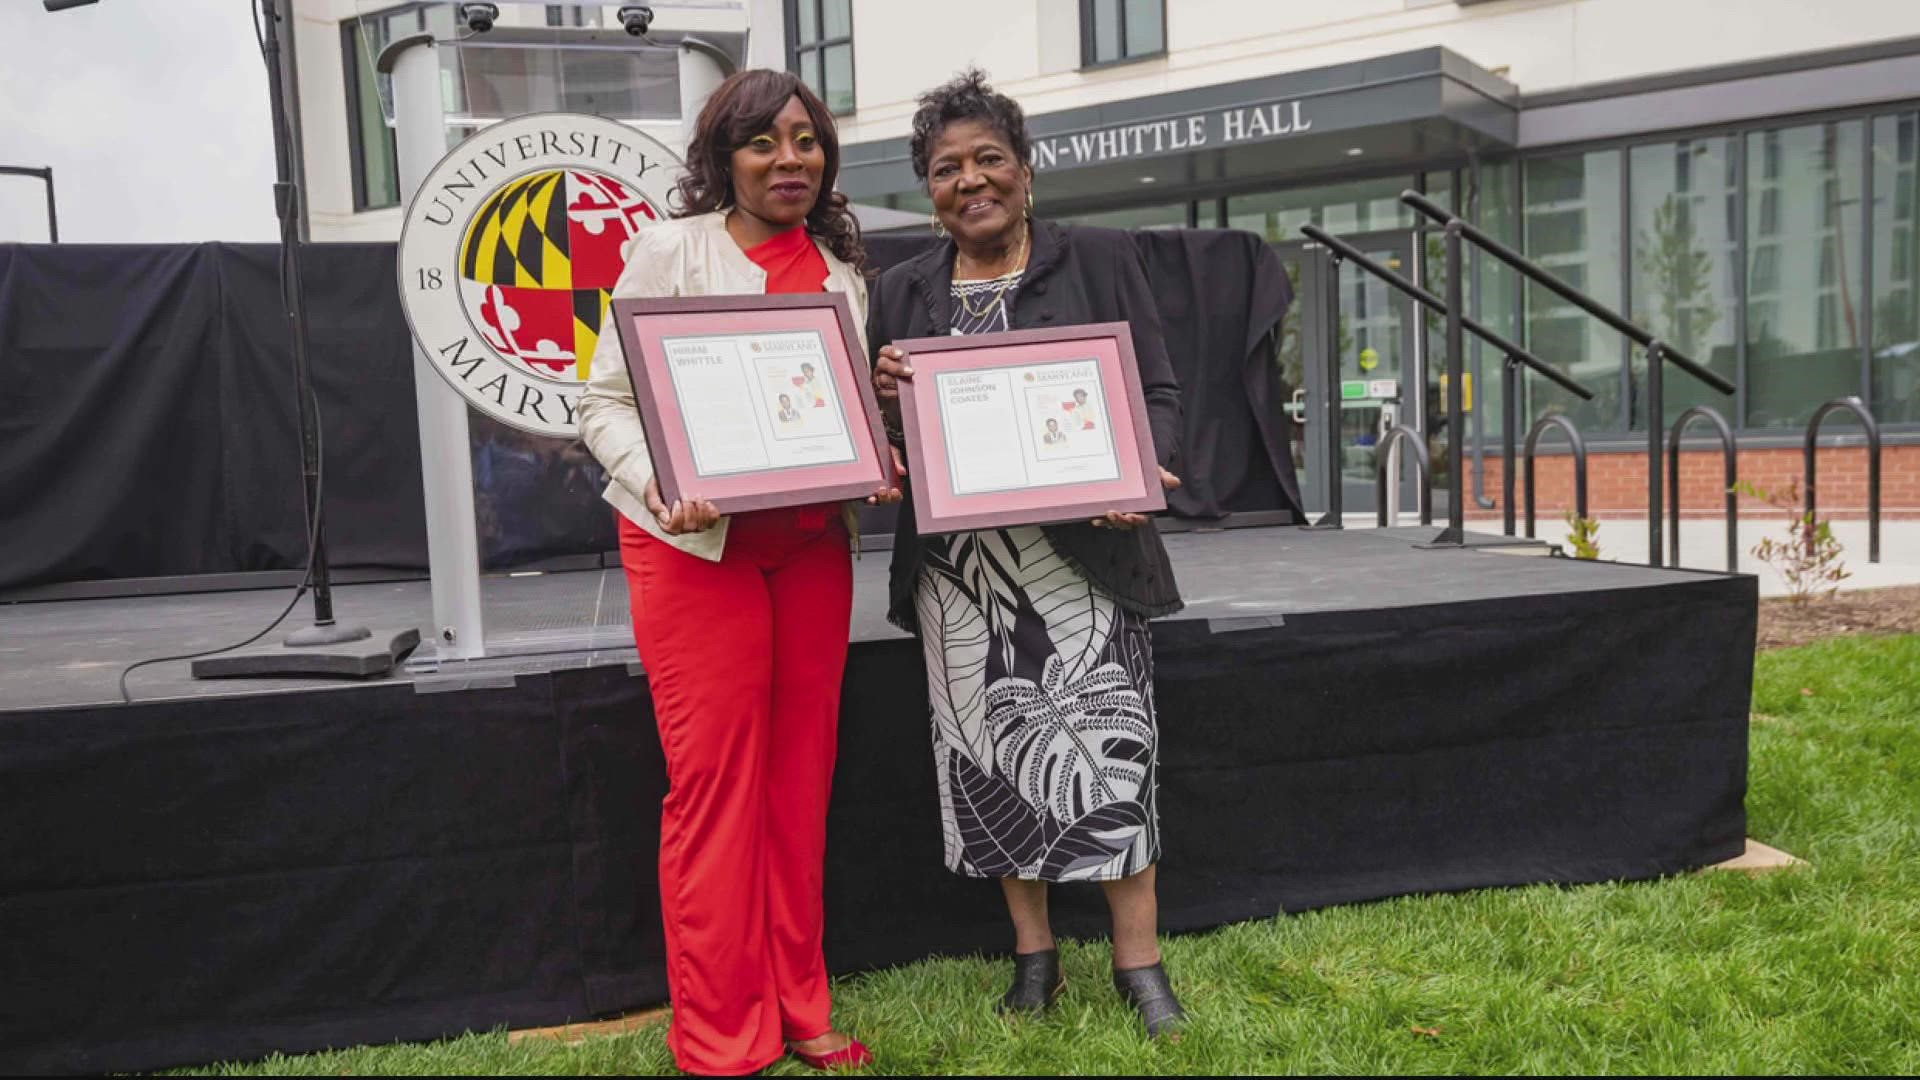 The university dedicated its newest residence hall, Johnson-Whittle Hall, honoring two pioneers who forged a path for generations of Black and African-American Terps